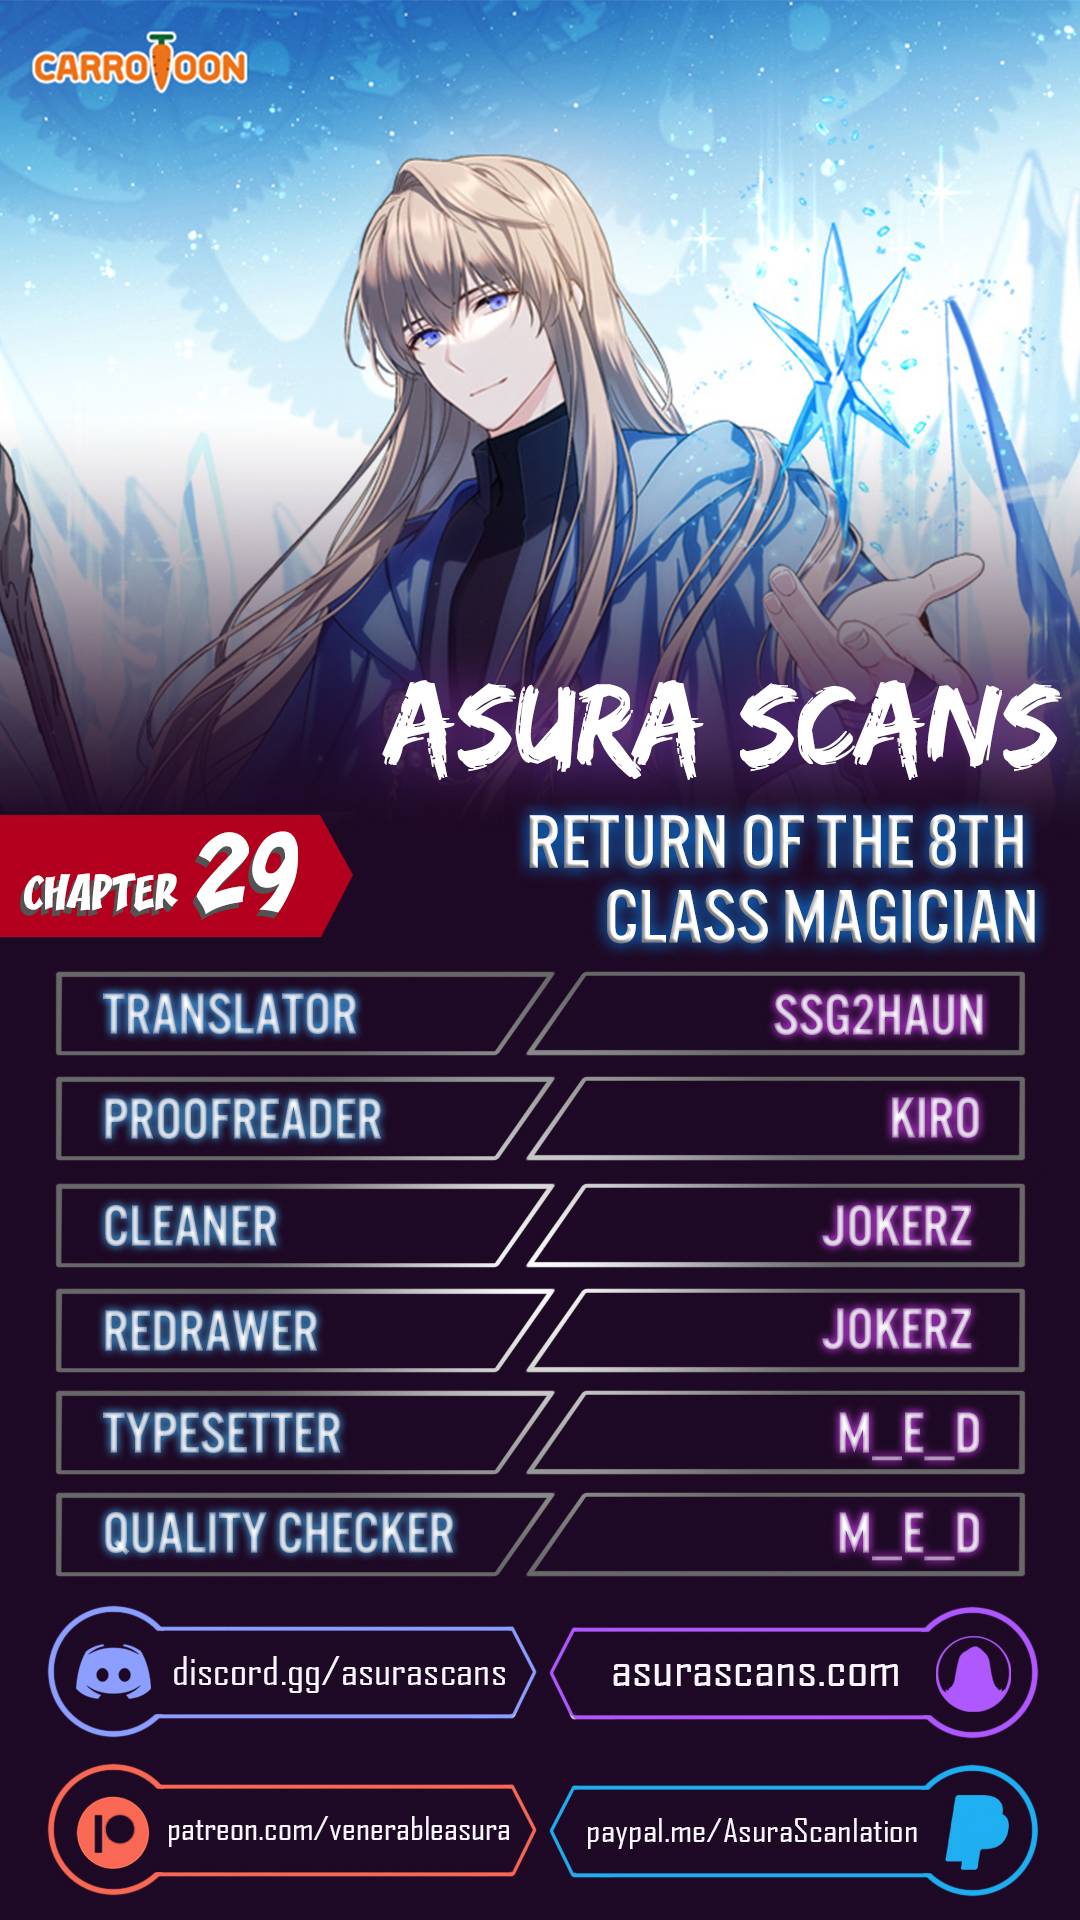 Return of the 8th class Magician chapter 29